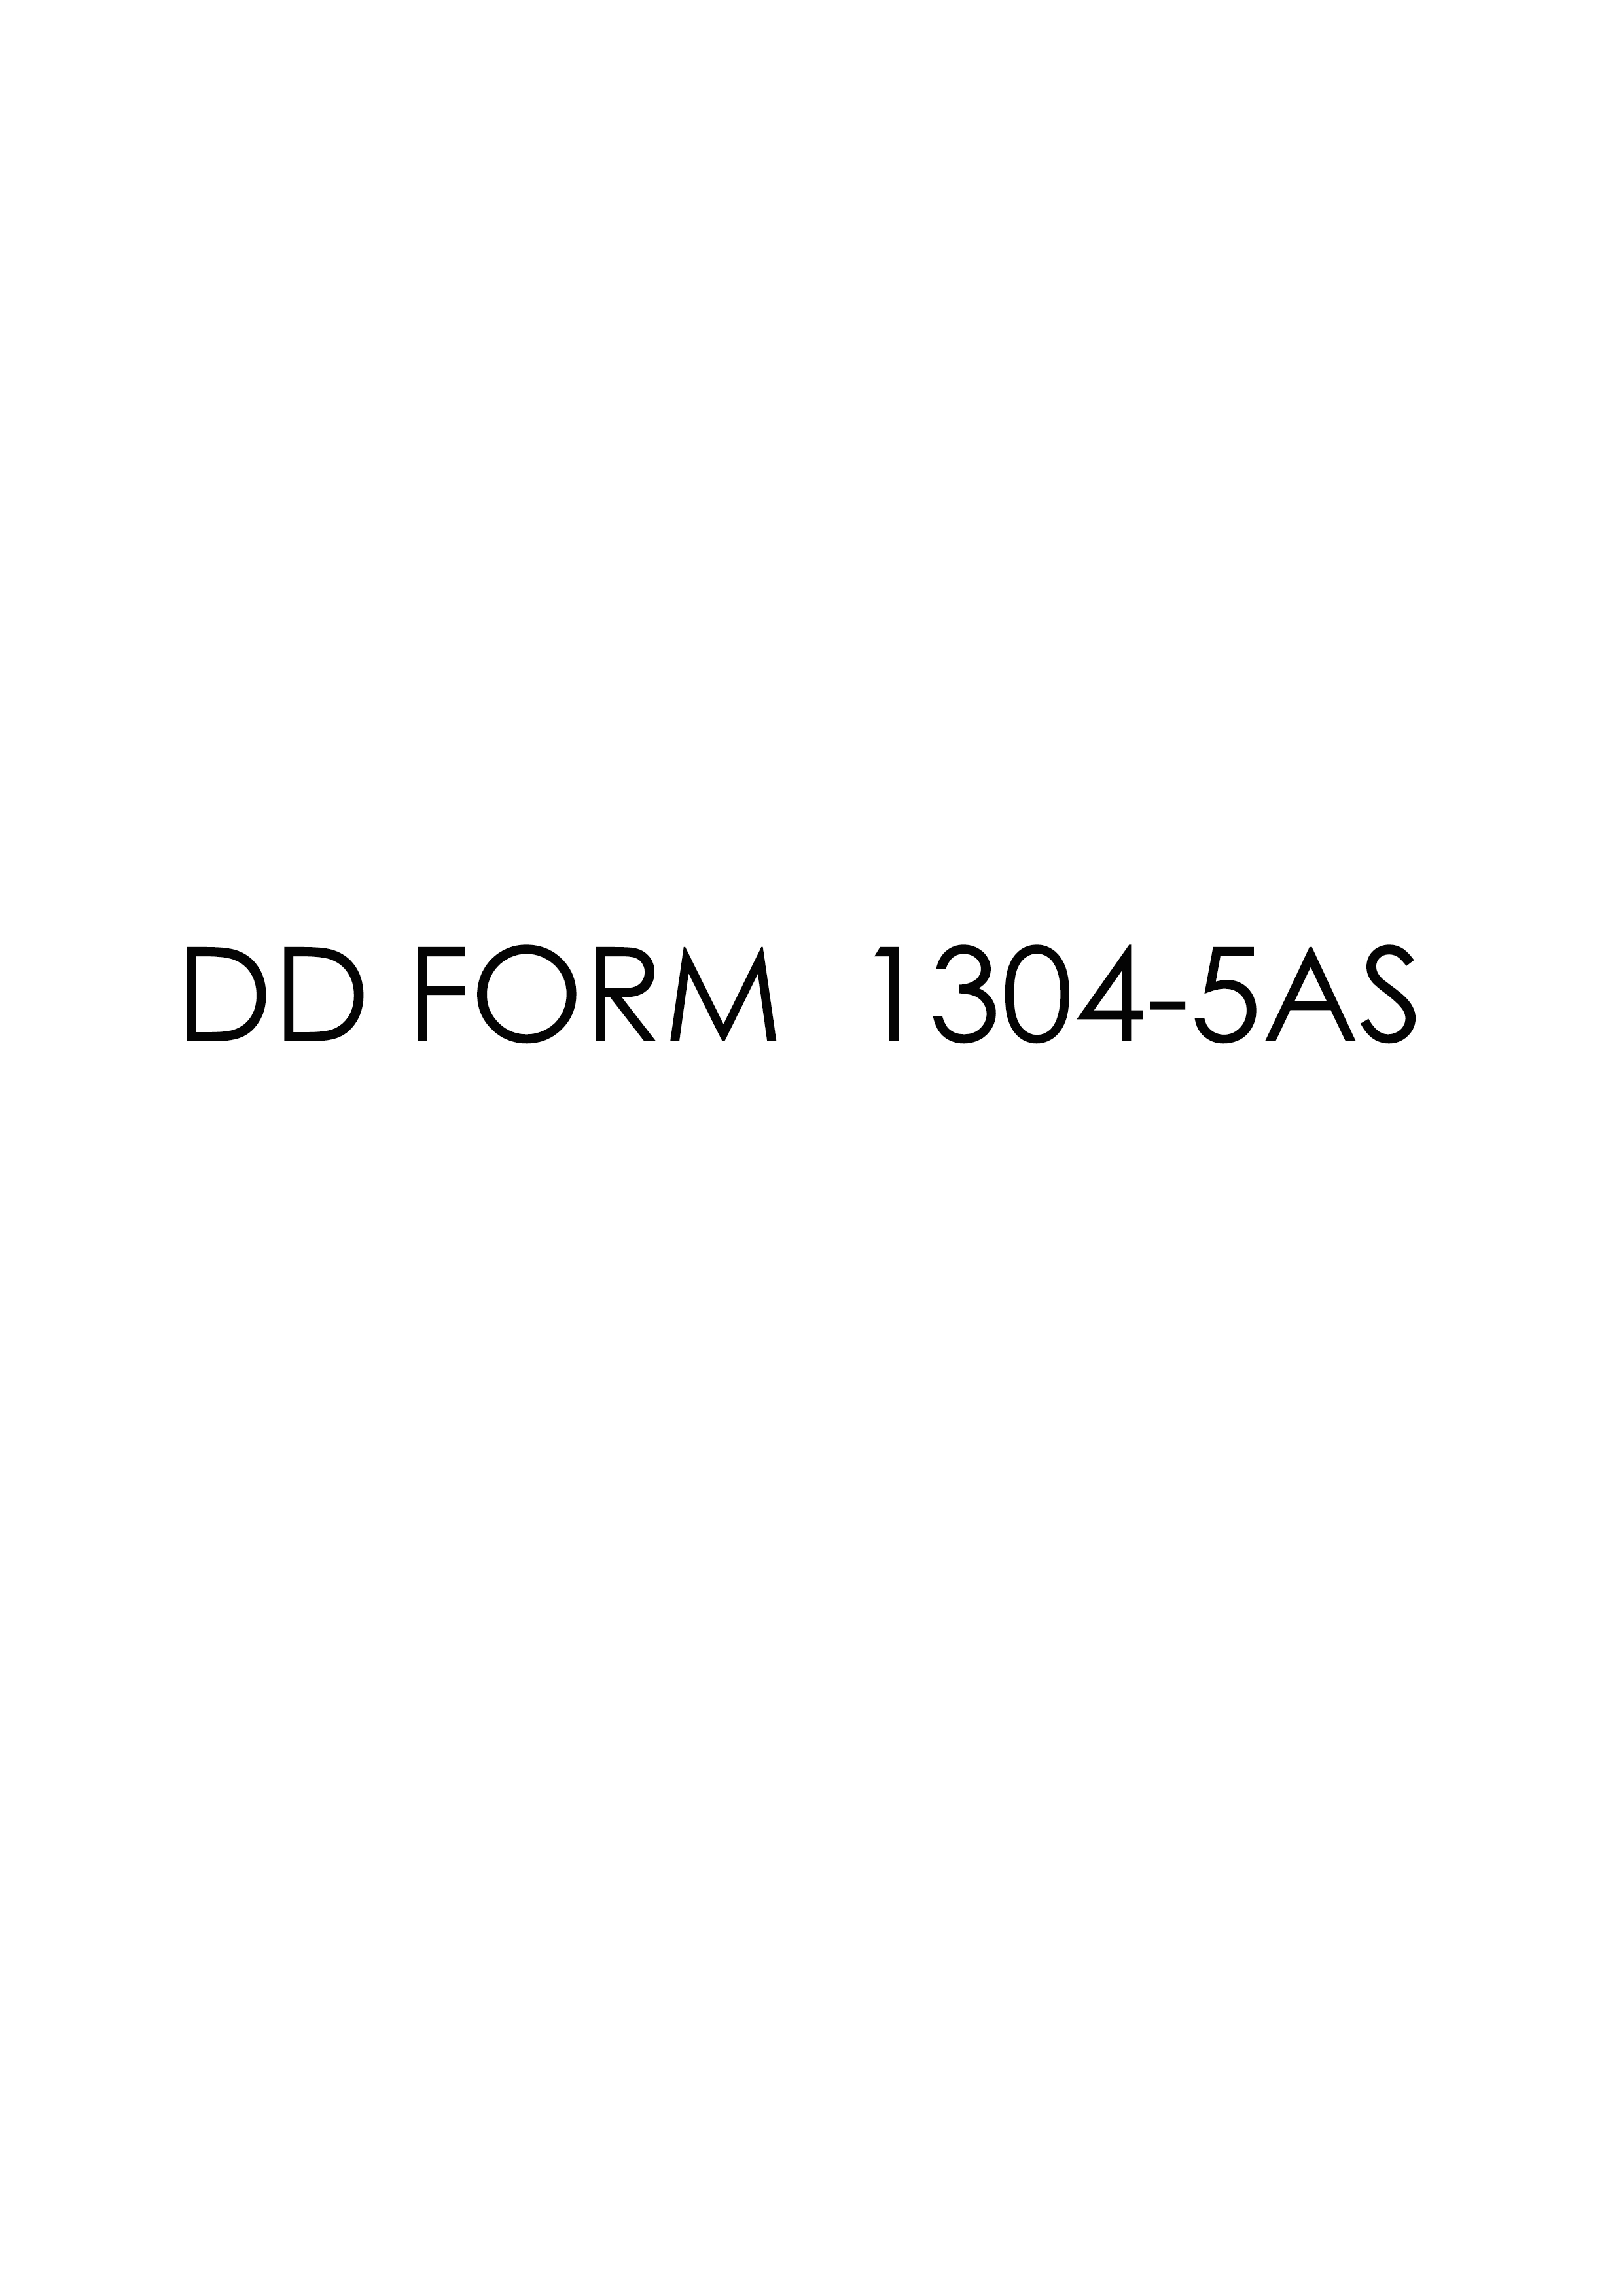 Download dd Form 1304-5AS